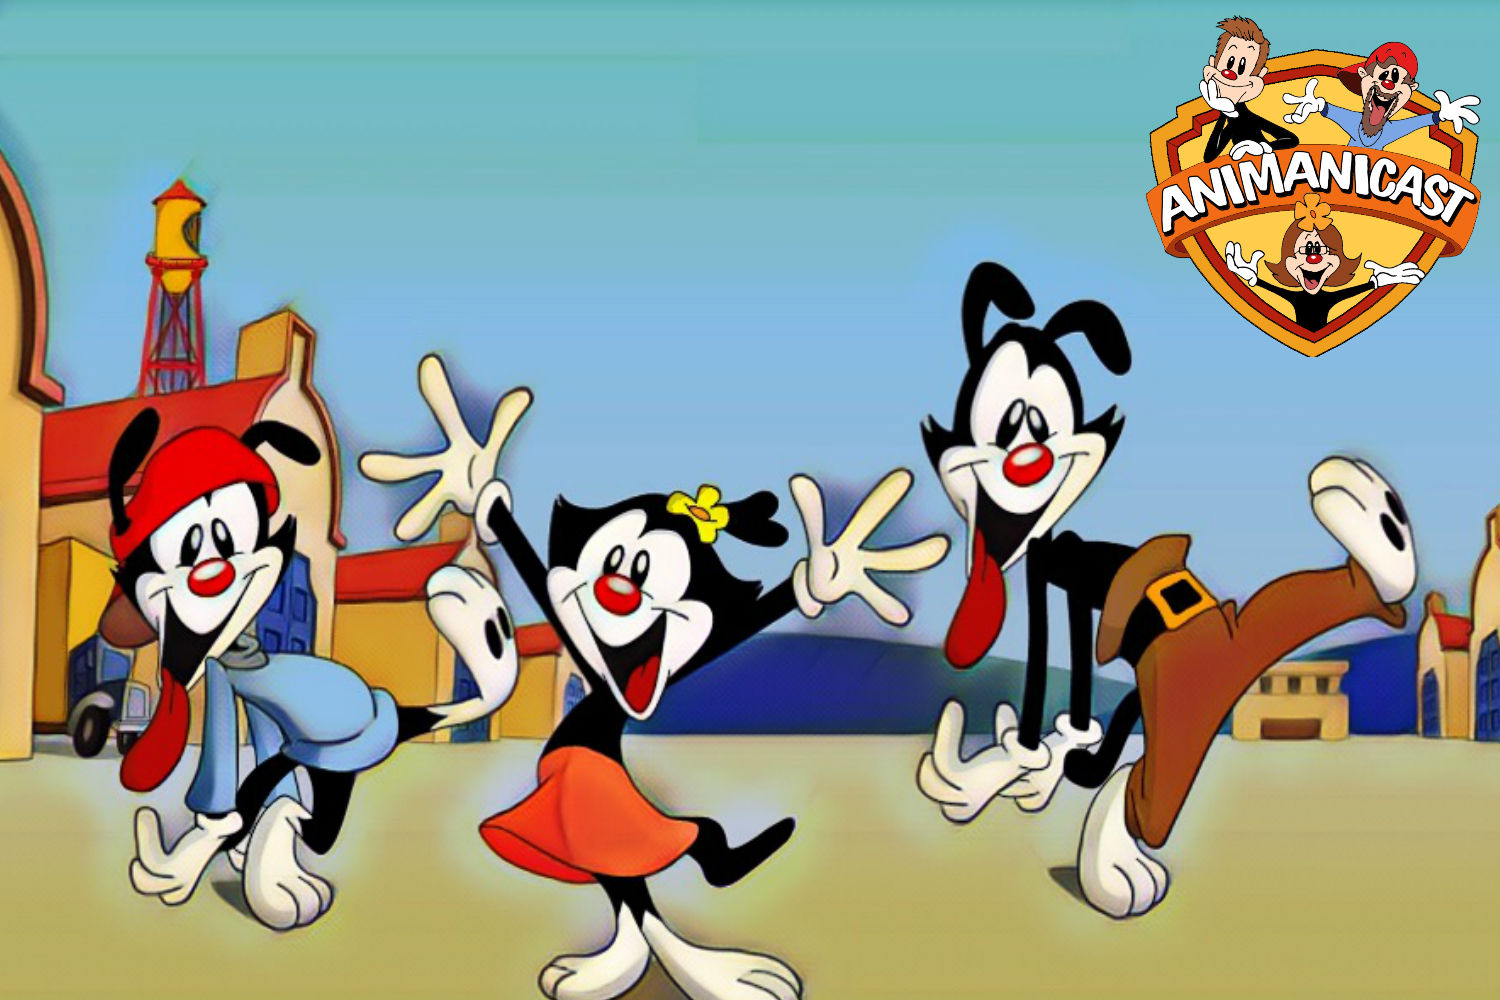 Animanicast: New Animaniacs Merch and More Rob Paulsen Stories.